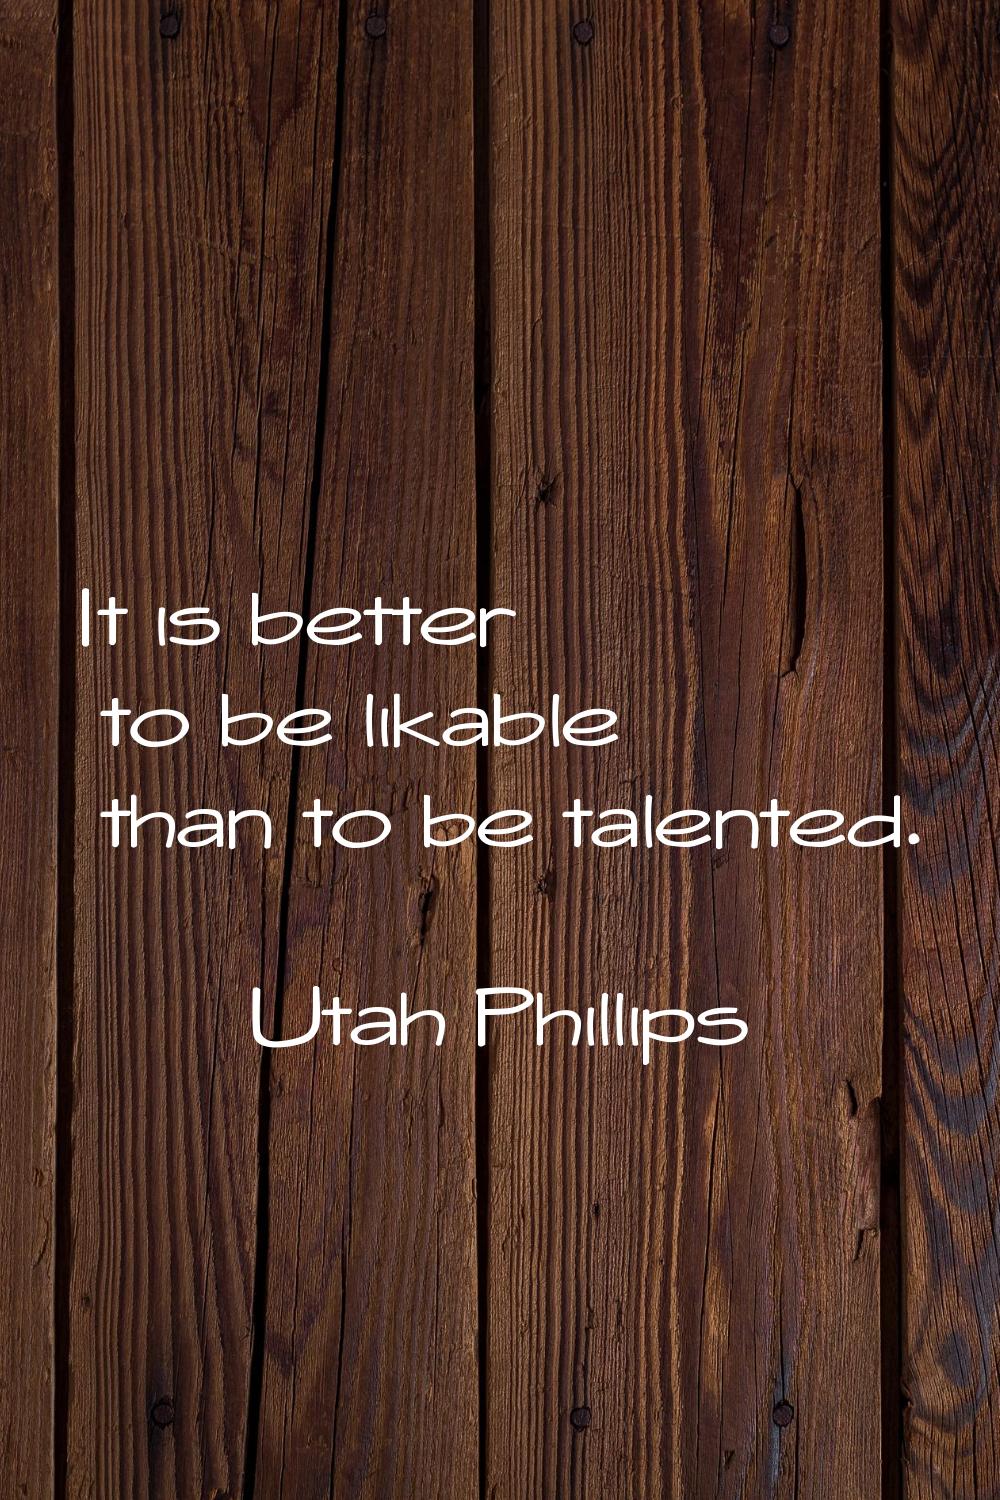 It is better to be likable than to be talented.